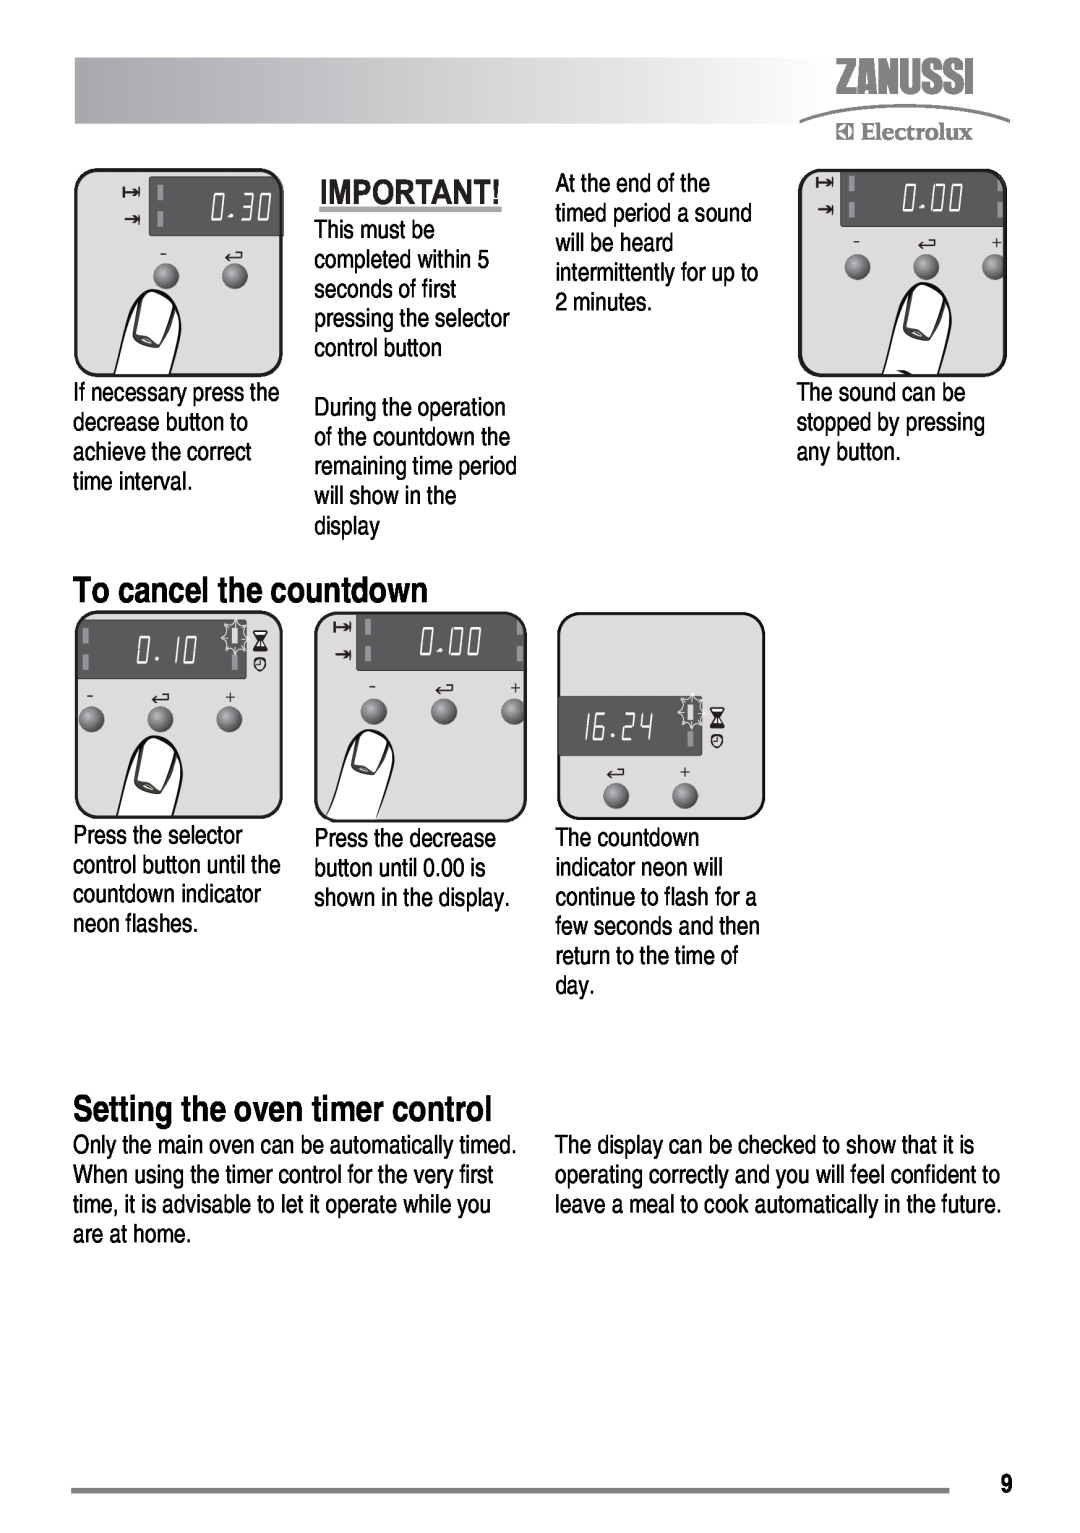 Zanussi FH10 user manual To cancel the countdown, Setting the oven timer control, Press the selector, countdown indicator 